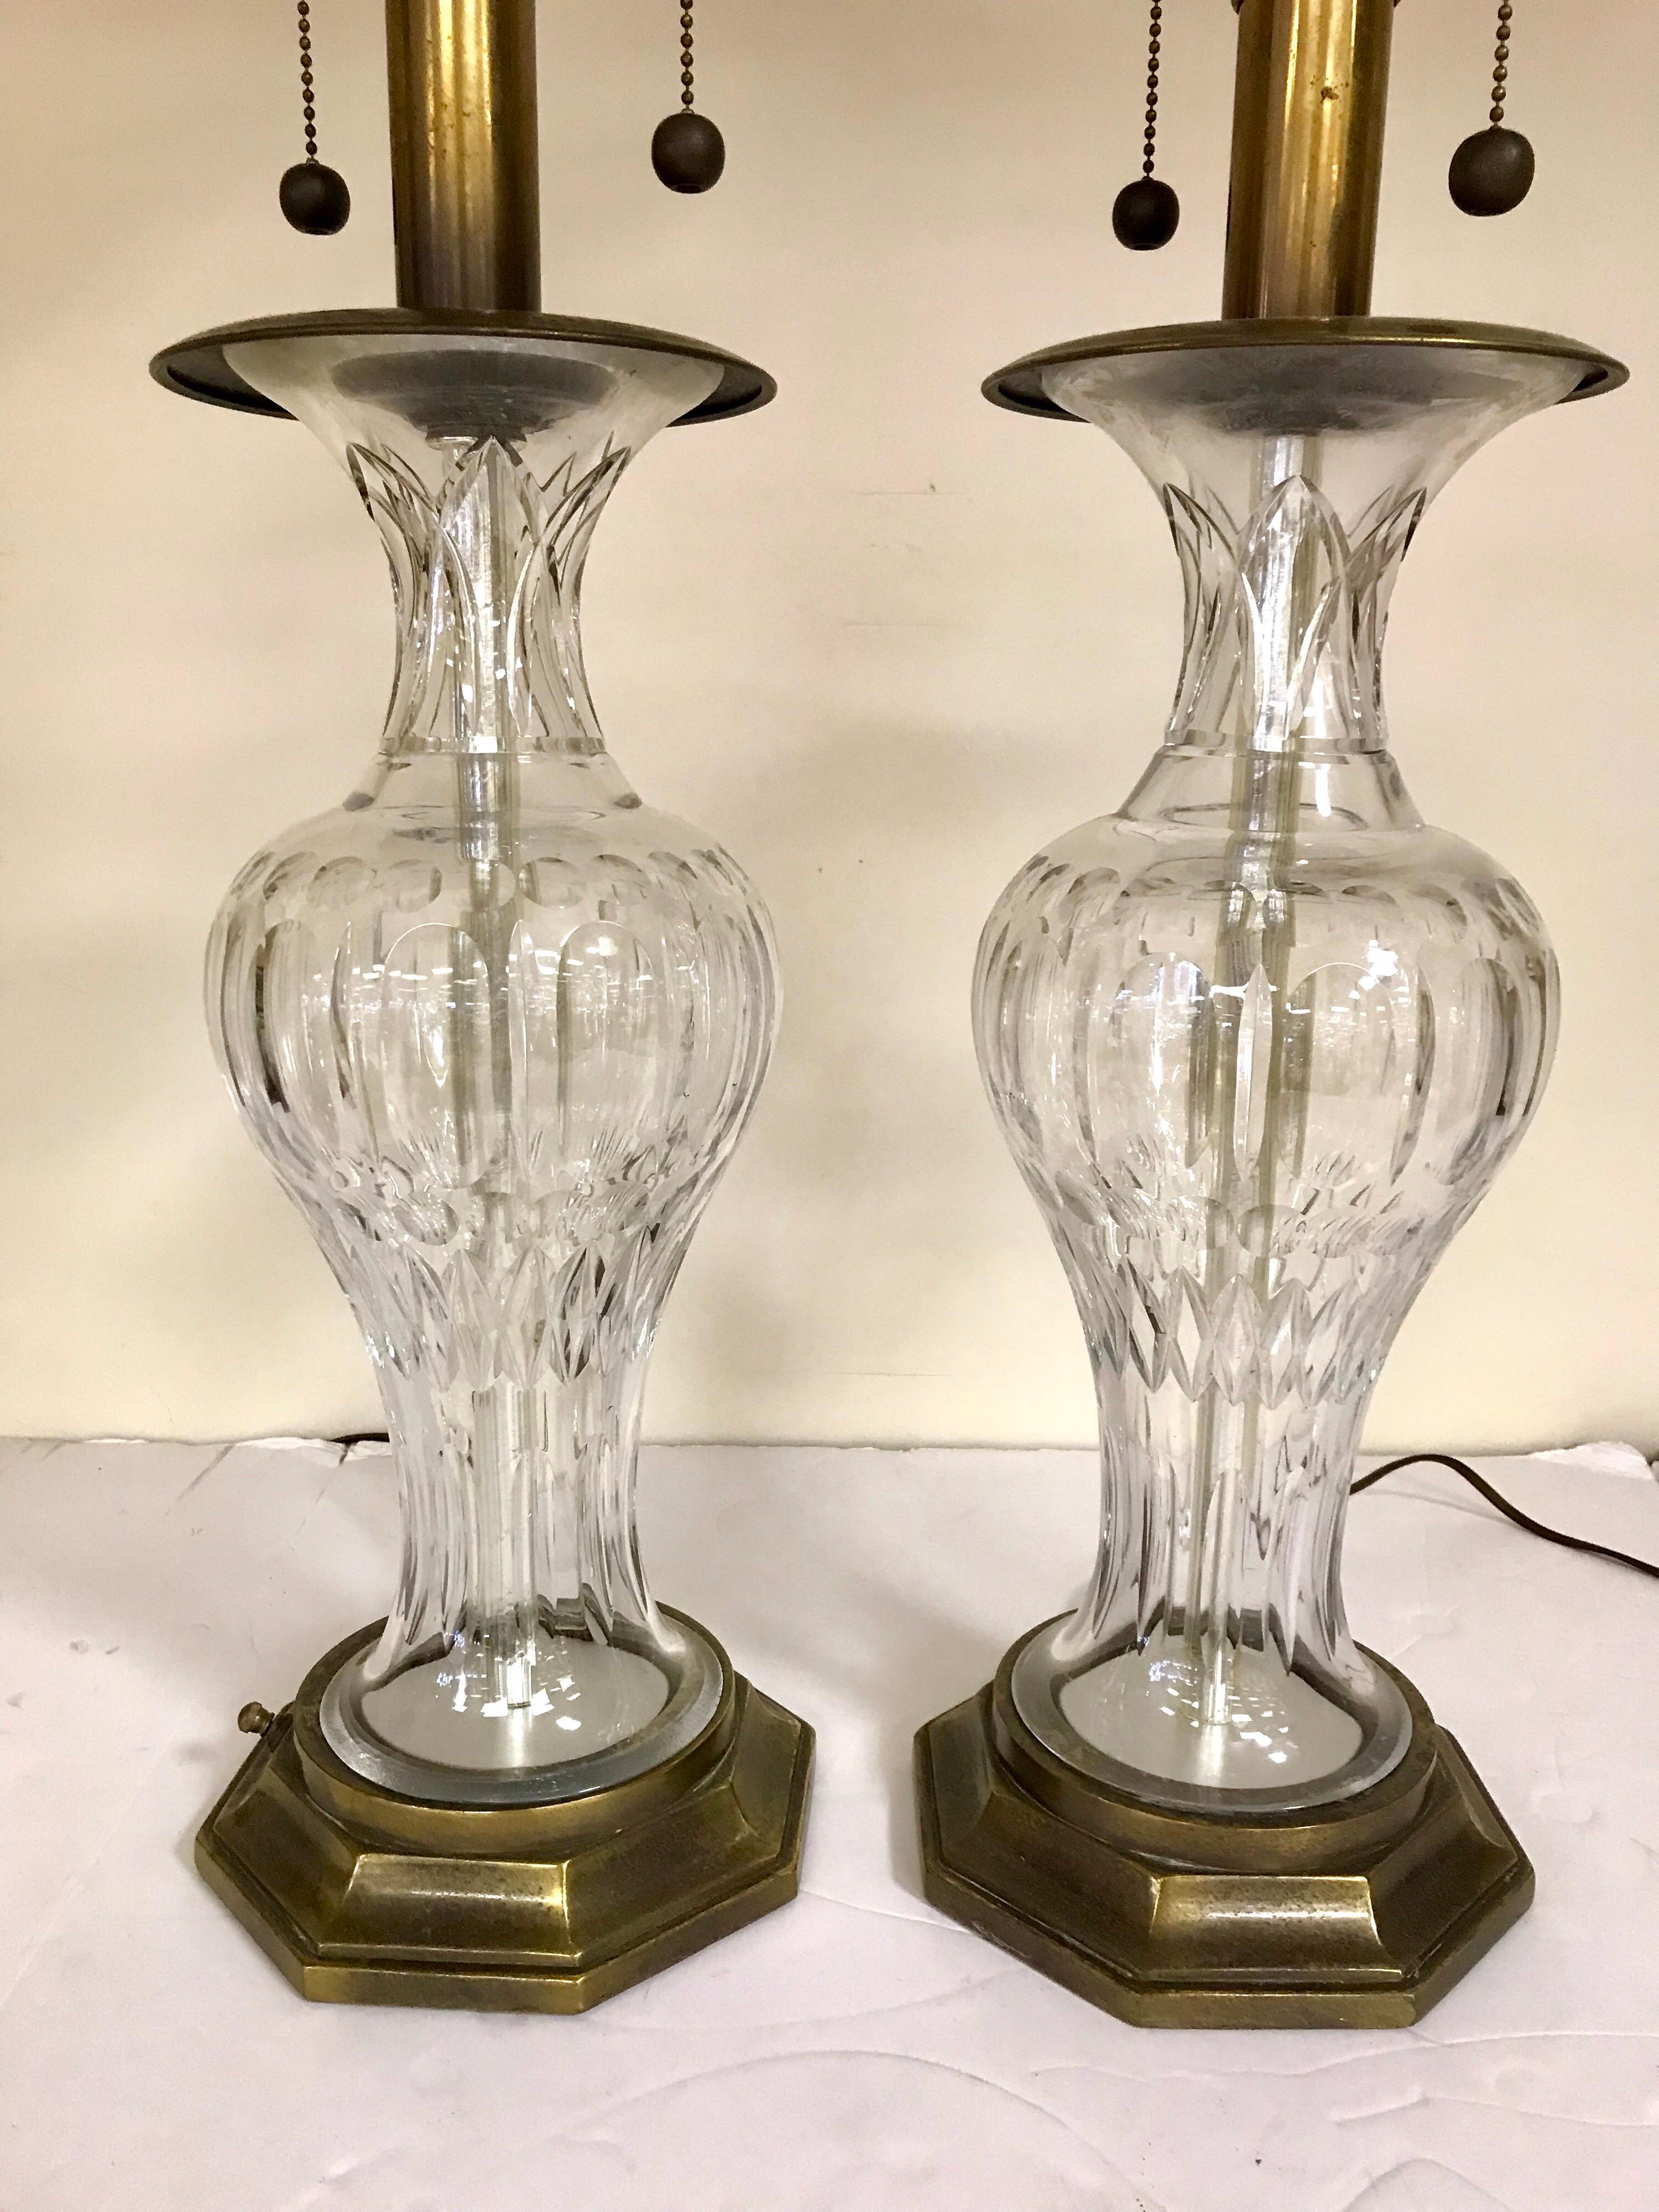 Elegant set of vintage French tall table lamps.